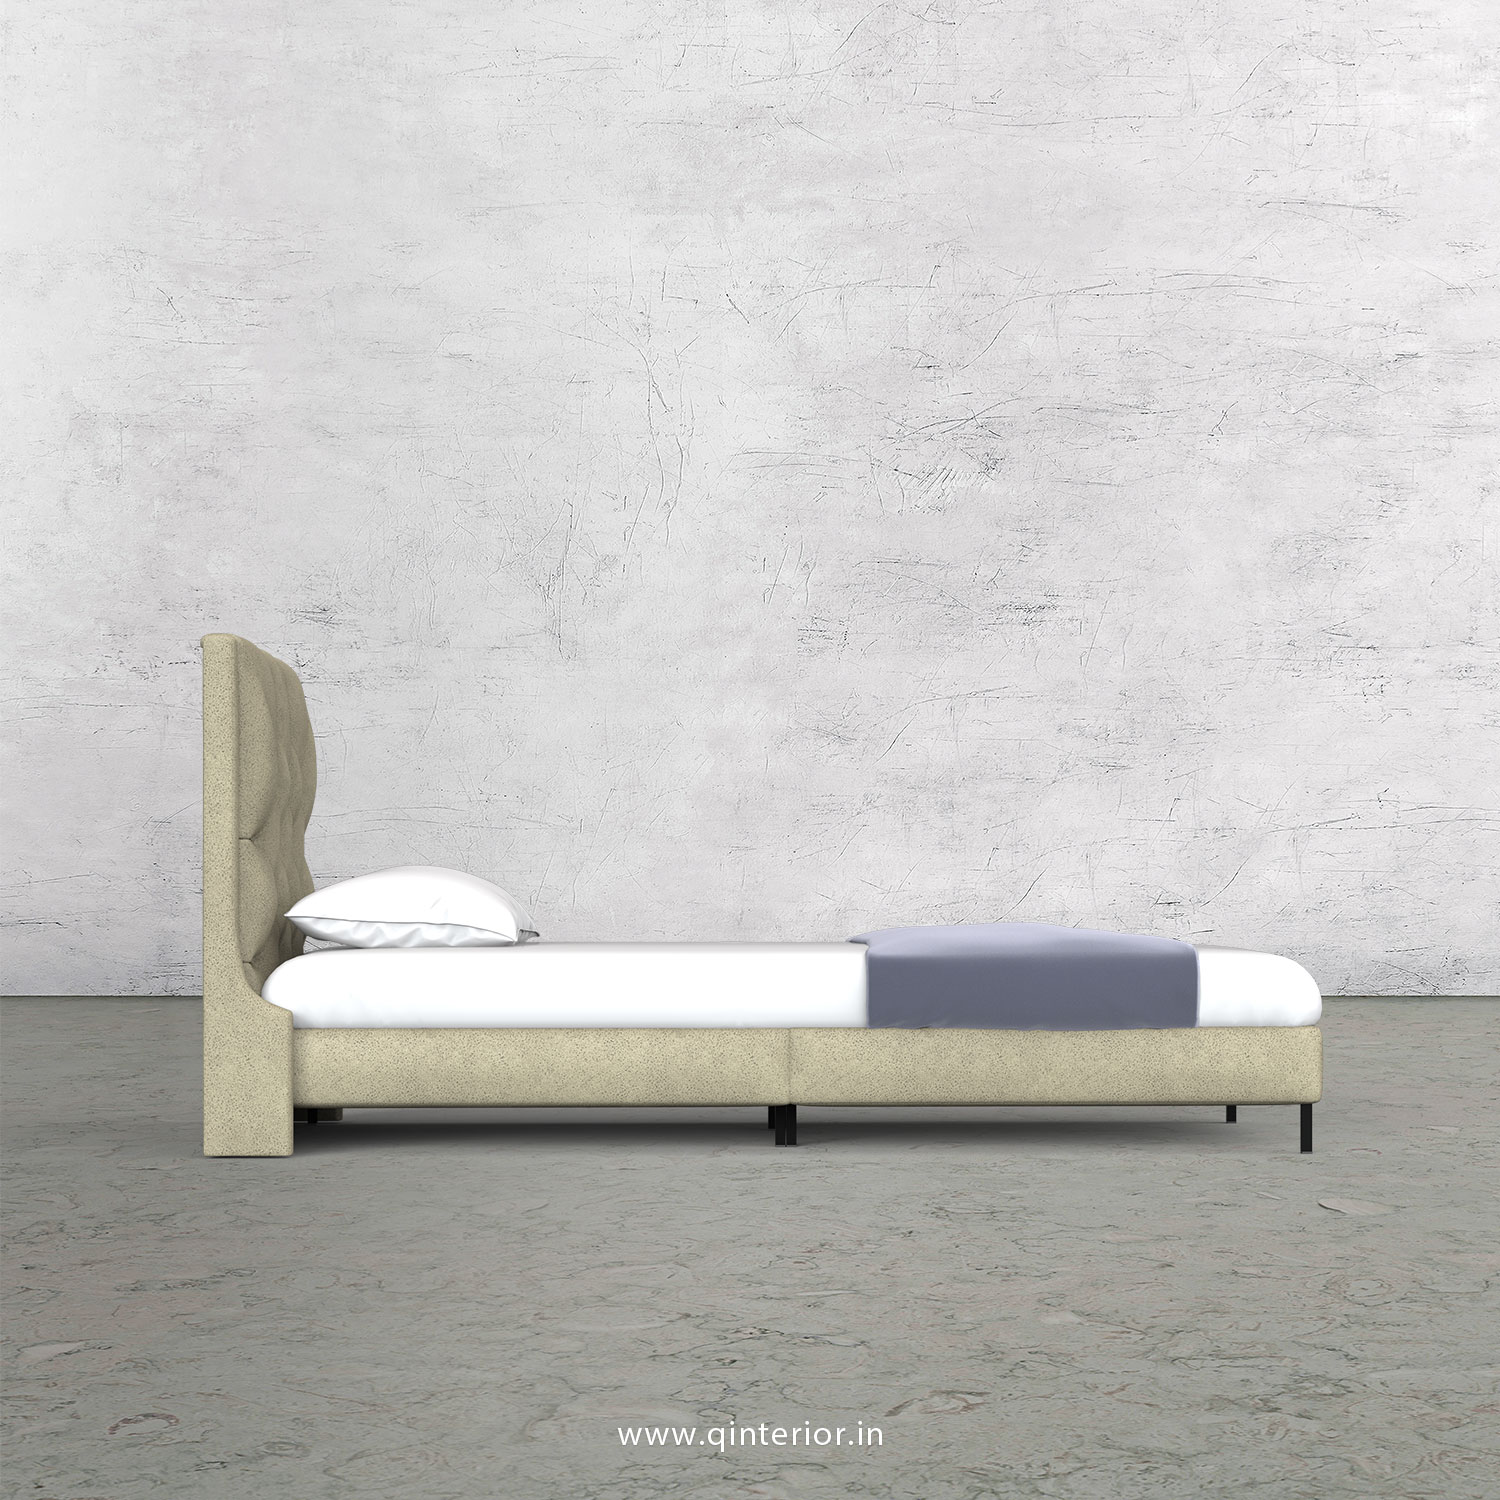 Scorpius Single Bed in Fab Leather – SBD003 FL10